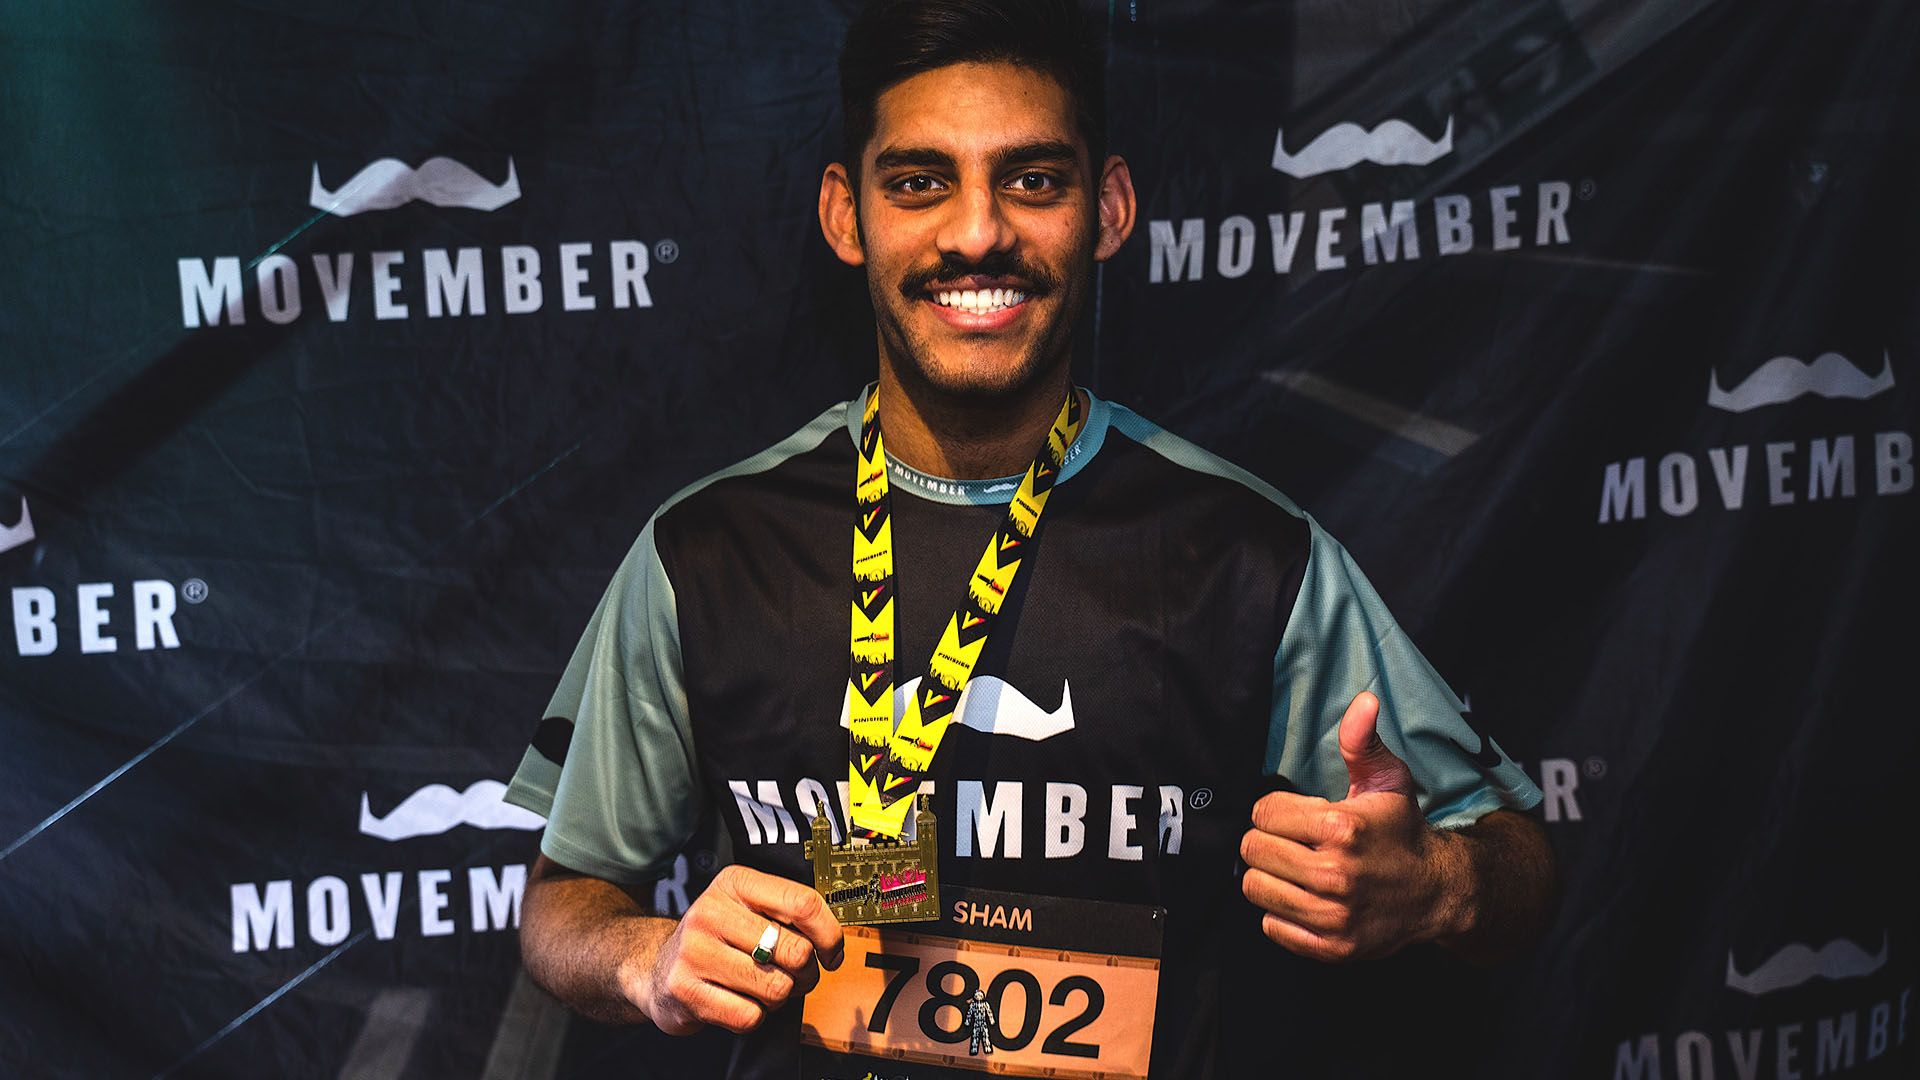 Photo of marathon runner in Movember-branded running gear, triumphantly giving a thumbs up to camera after finishing a race..